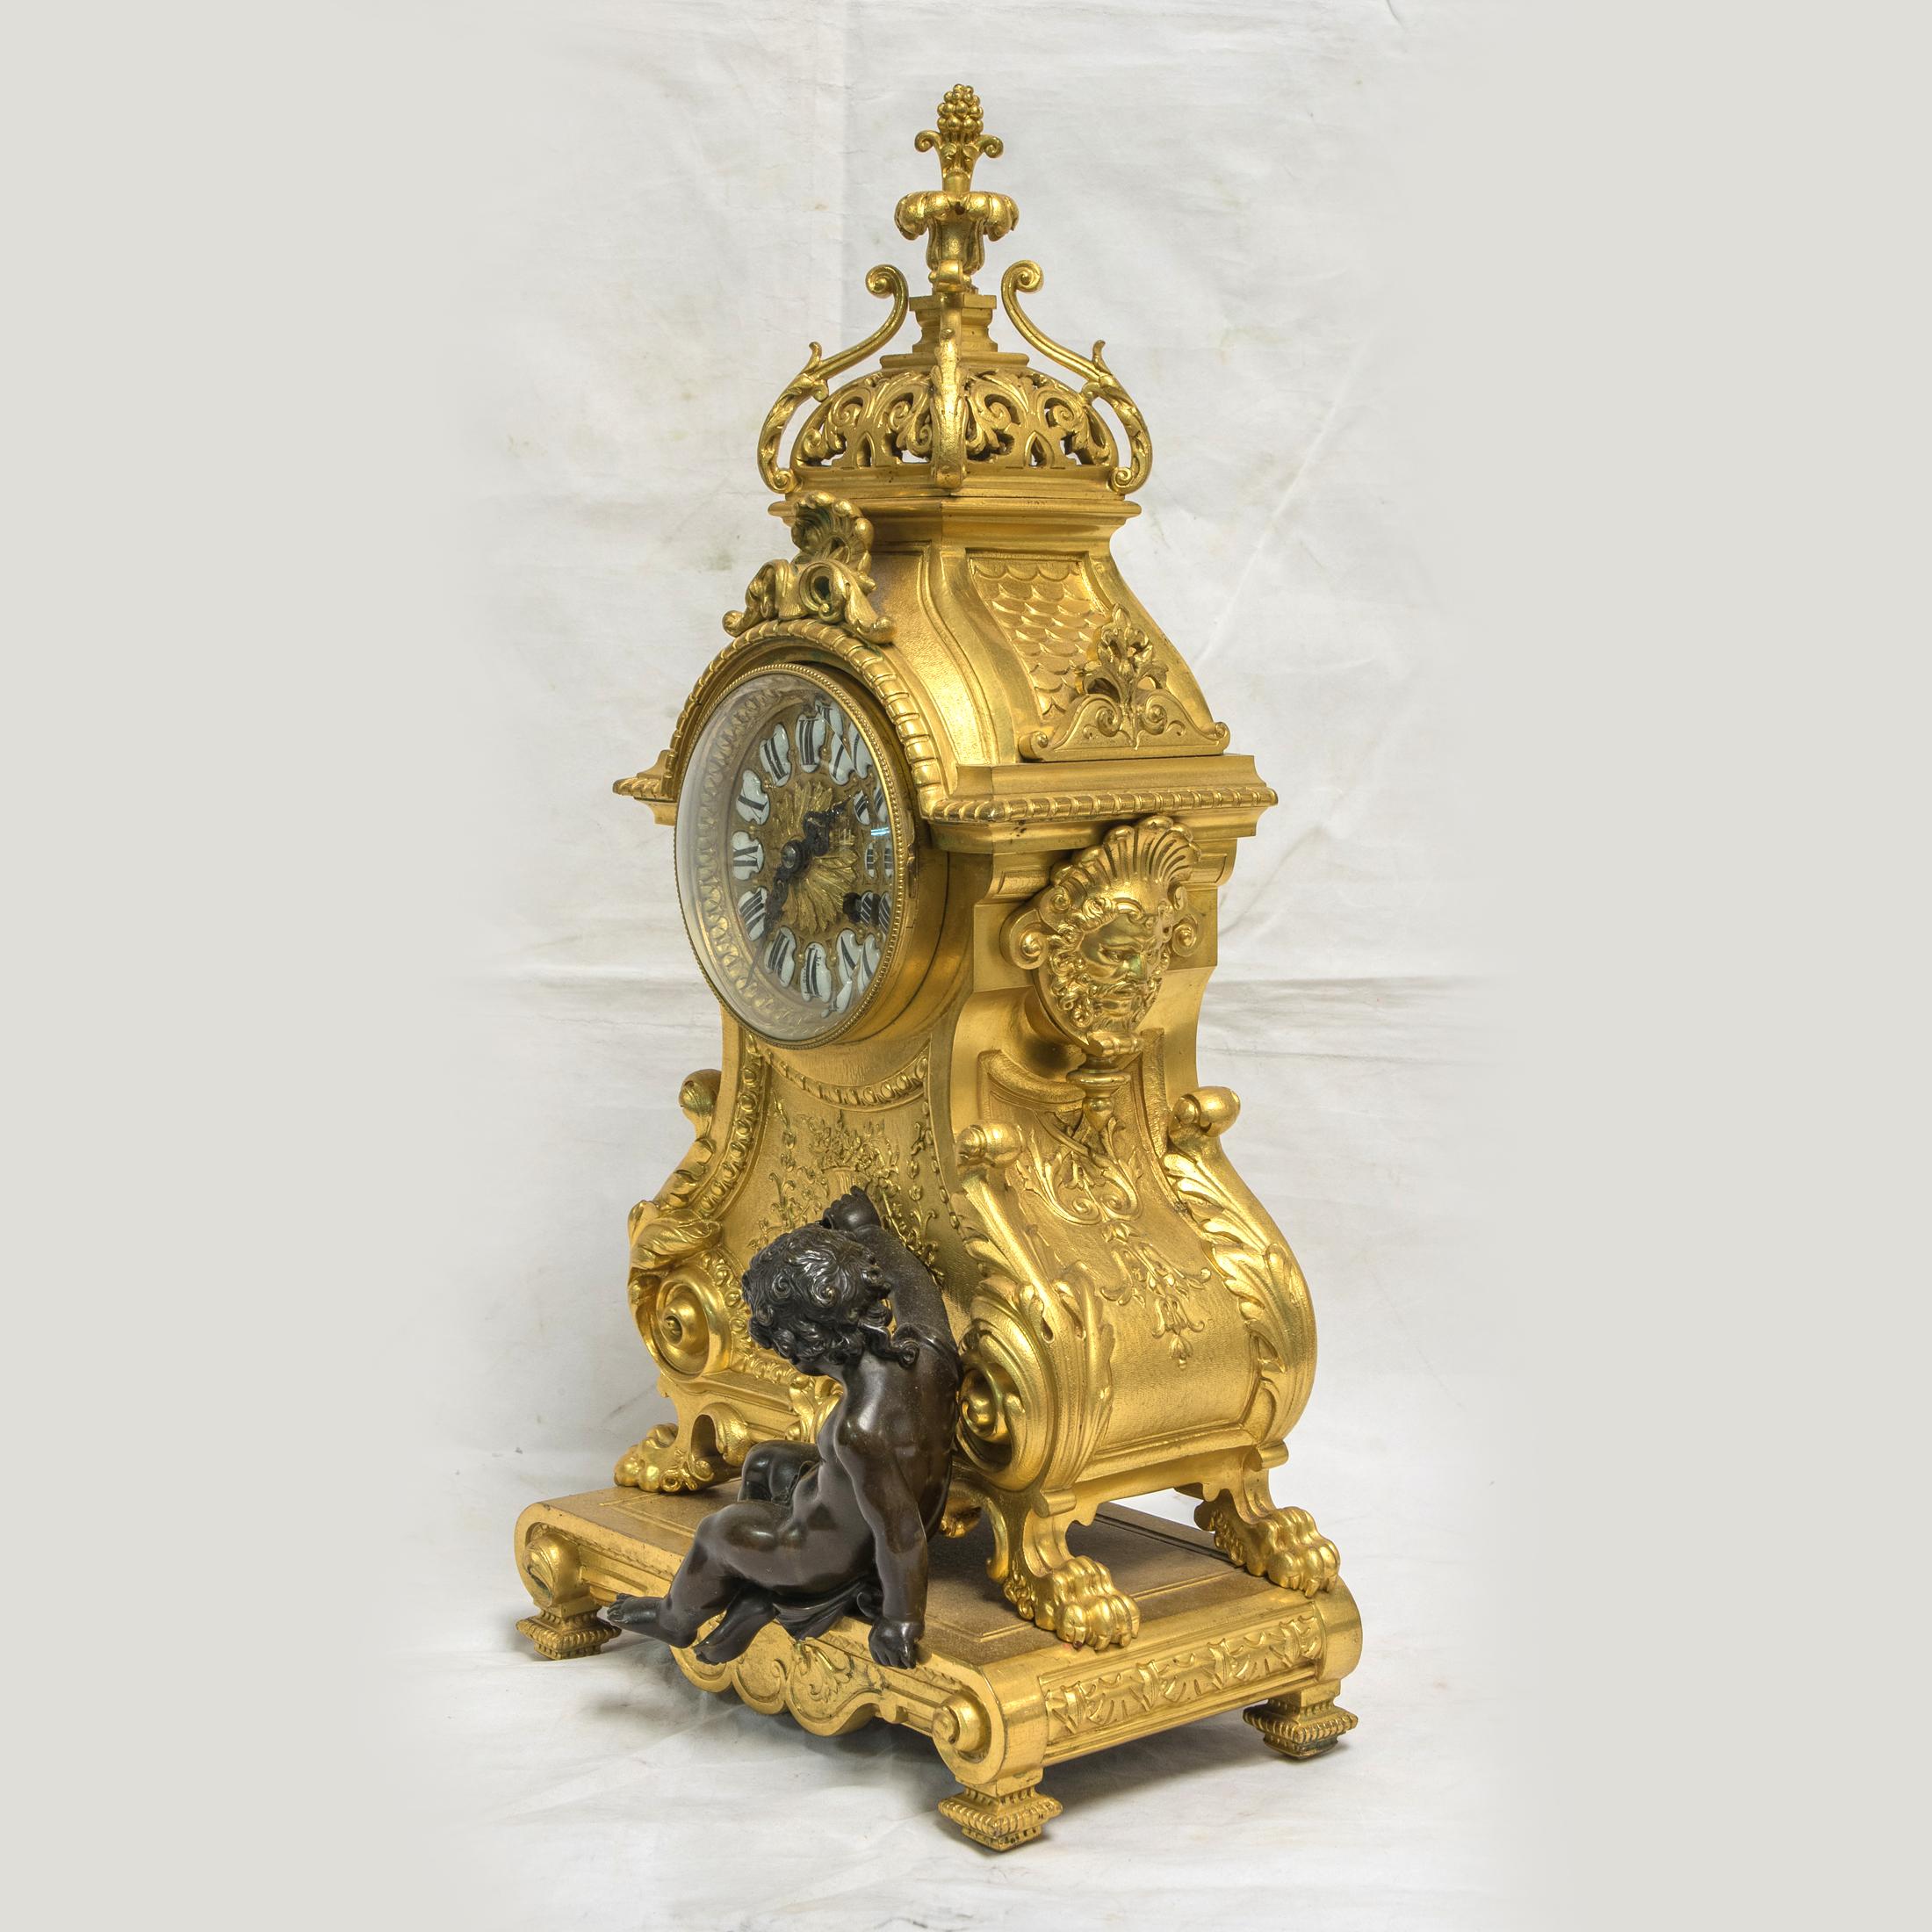 A fine quality Louis XV-style gilt bronze figural mantel clock by E. Godeau Paris.
This flamboyant mantel clock with a finely detailed seated patinated bronze putto. 

Movement: E. GODEAU PARIS
Origin: French
Date: 19th century
Dimension: 19